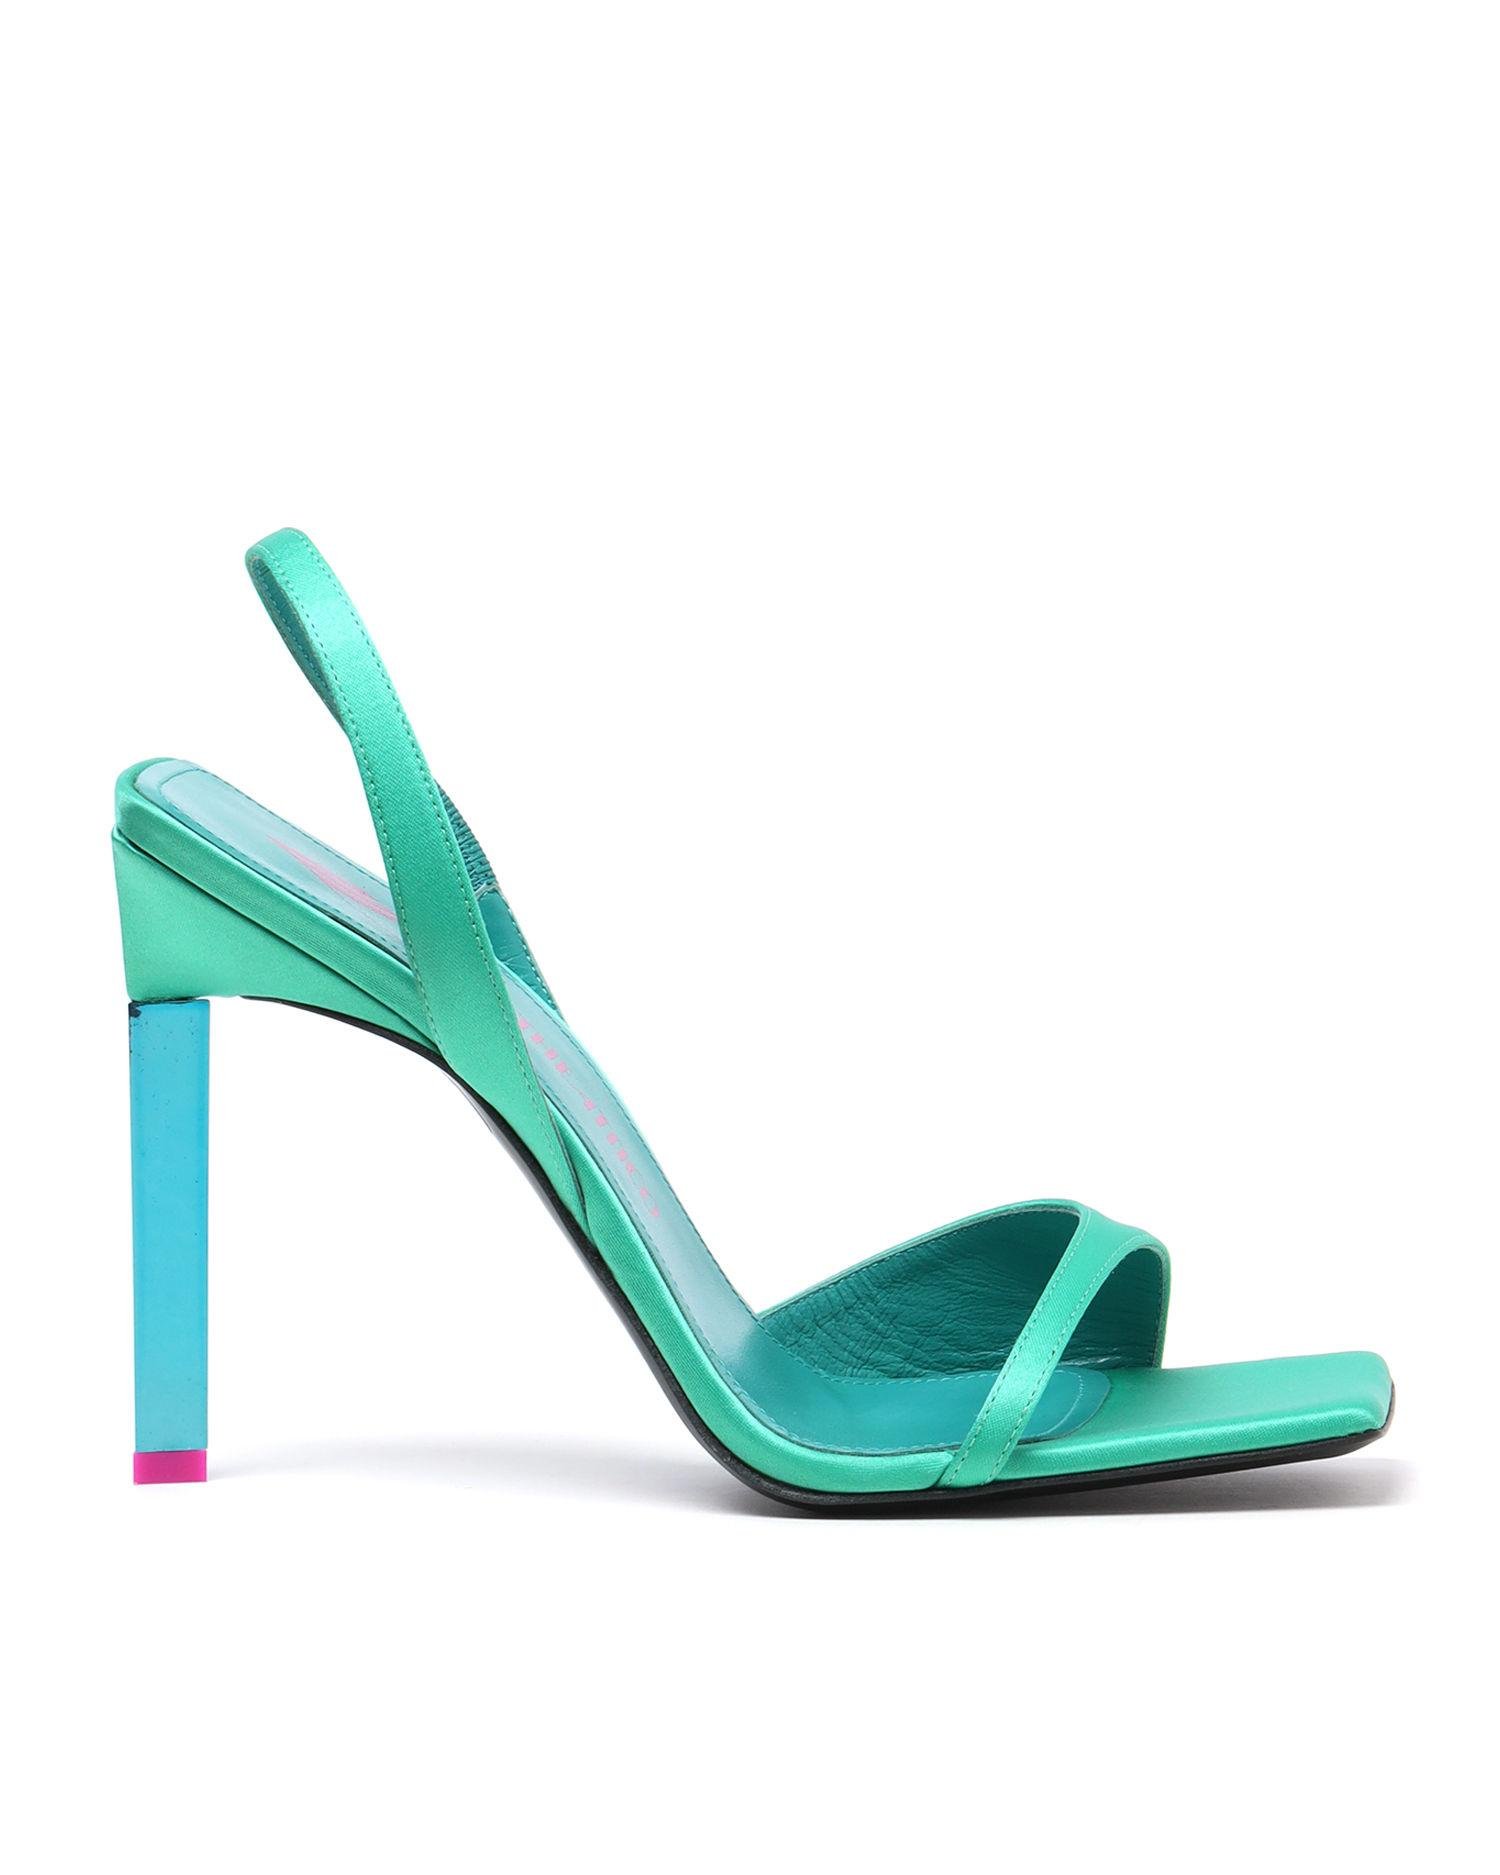 "Ginger'' emerald sandals by THE ATTICO